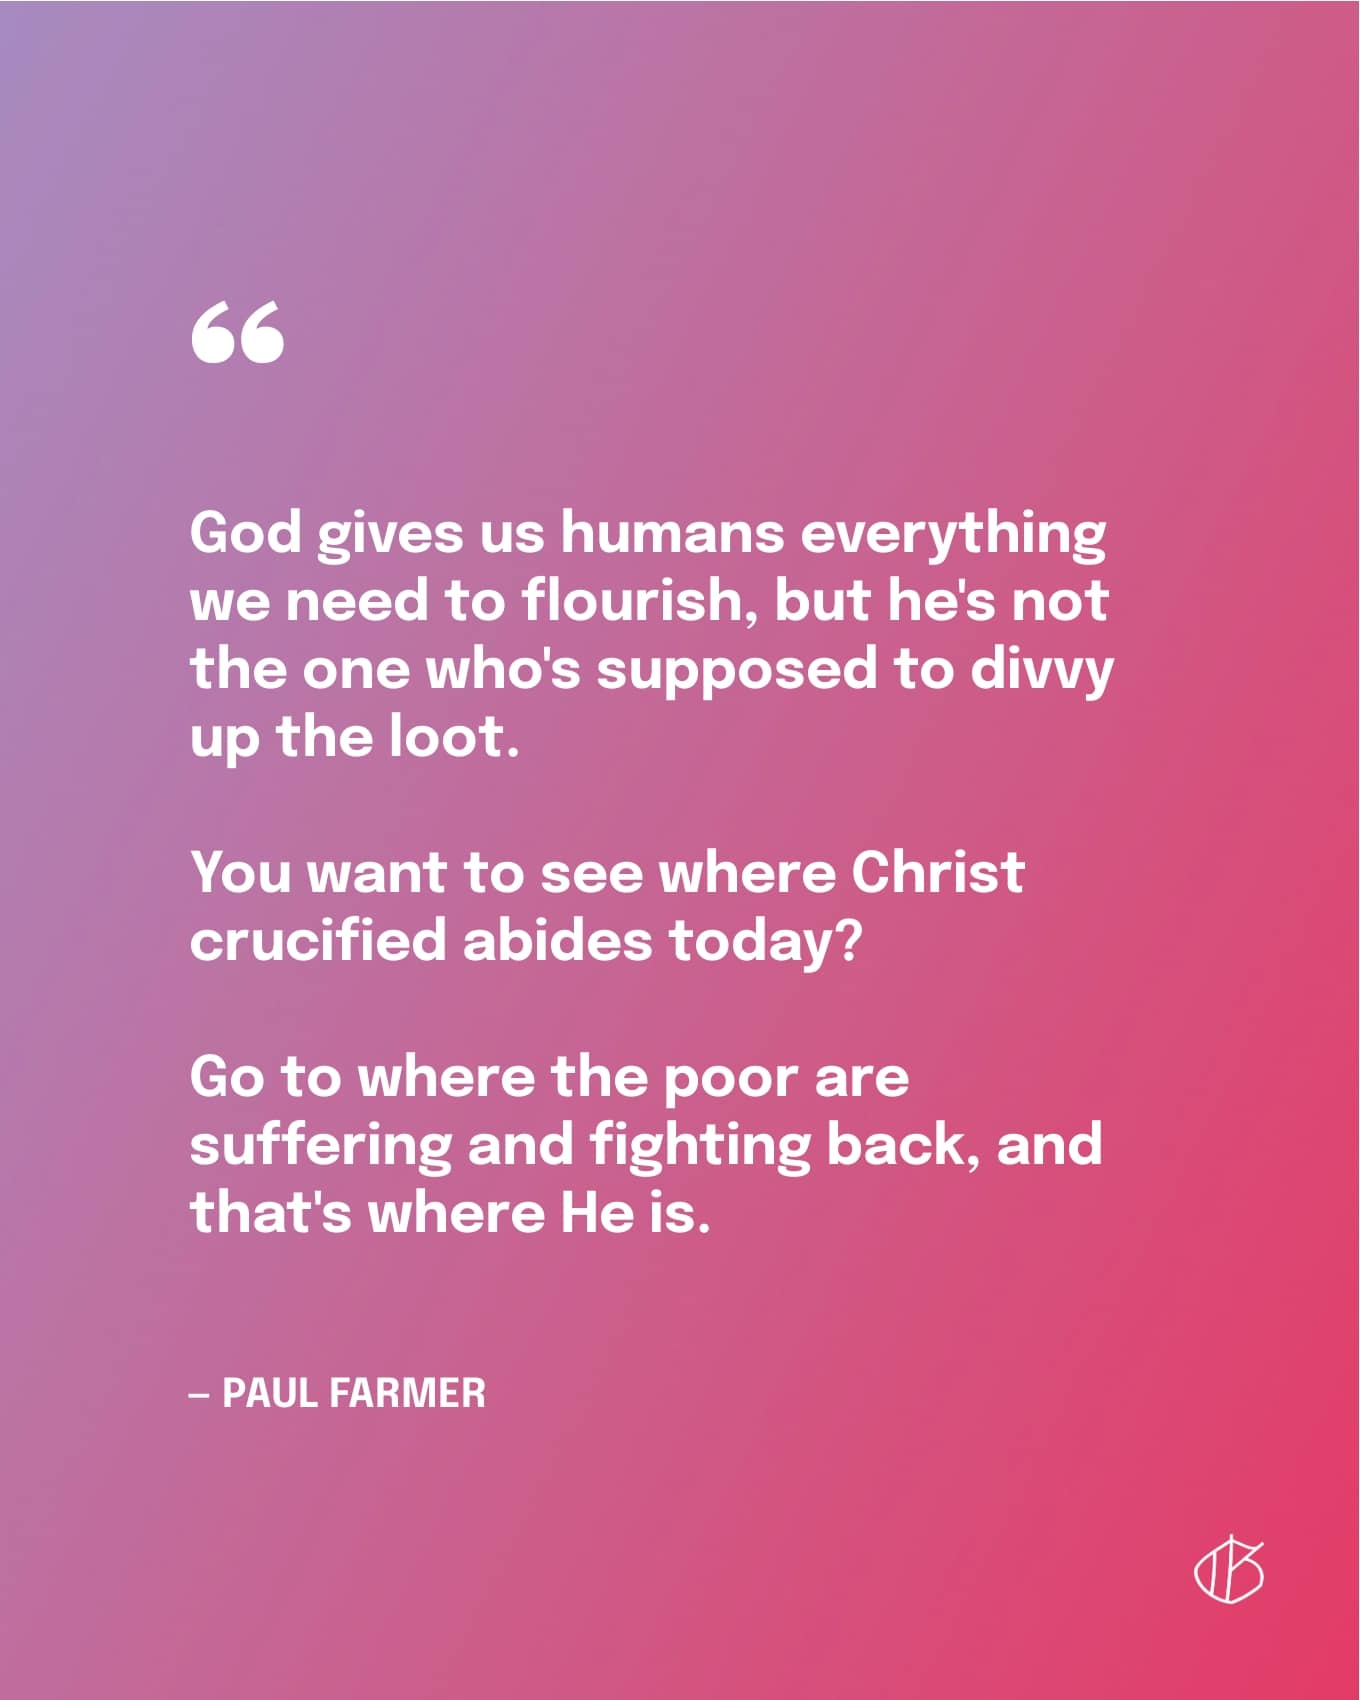 Paul Farmer Quote: “God gives us humans everything we need to flourish, but he's not the one who's supposed to divvy up the loot. You want to see where Christ crucified abides today? Go to where the poor are suffering and fighting back, and that's where He is.” — Paul Farmer